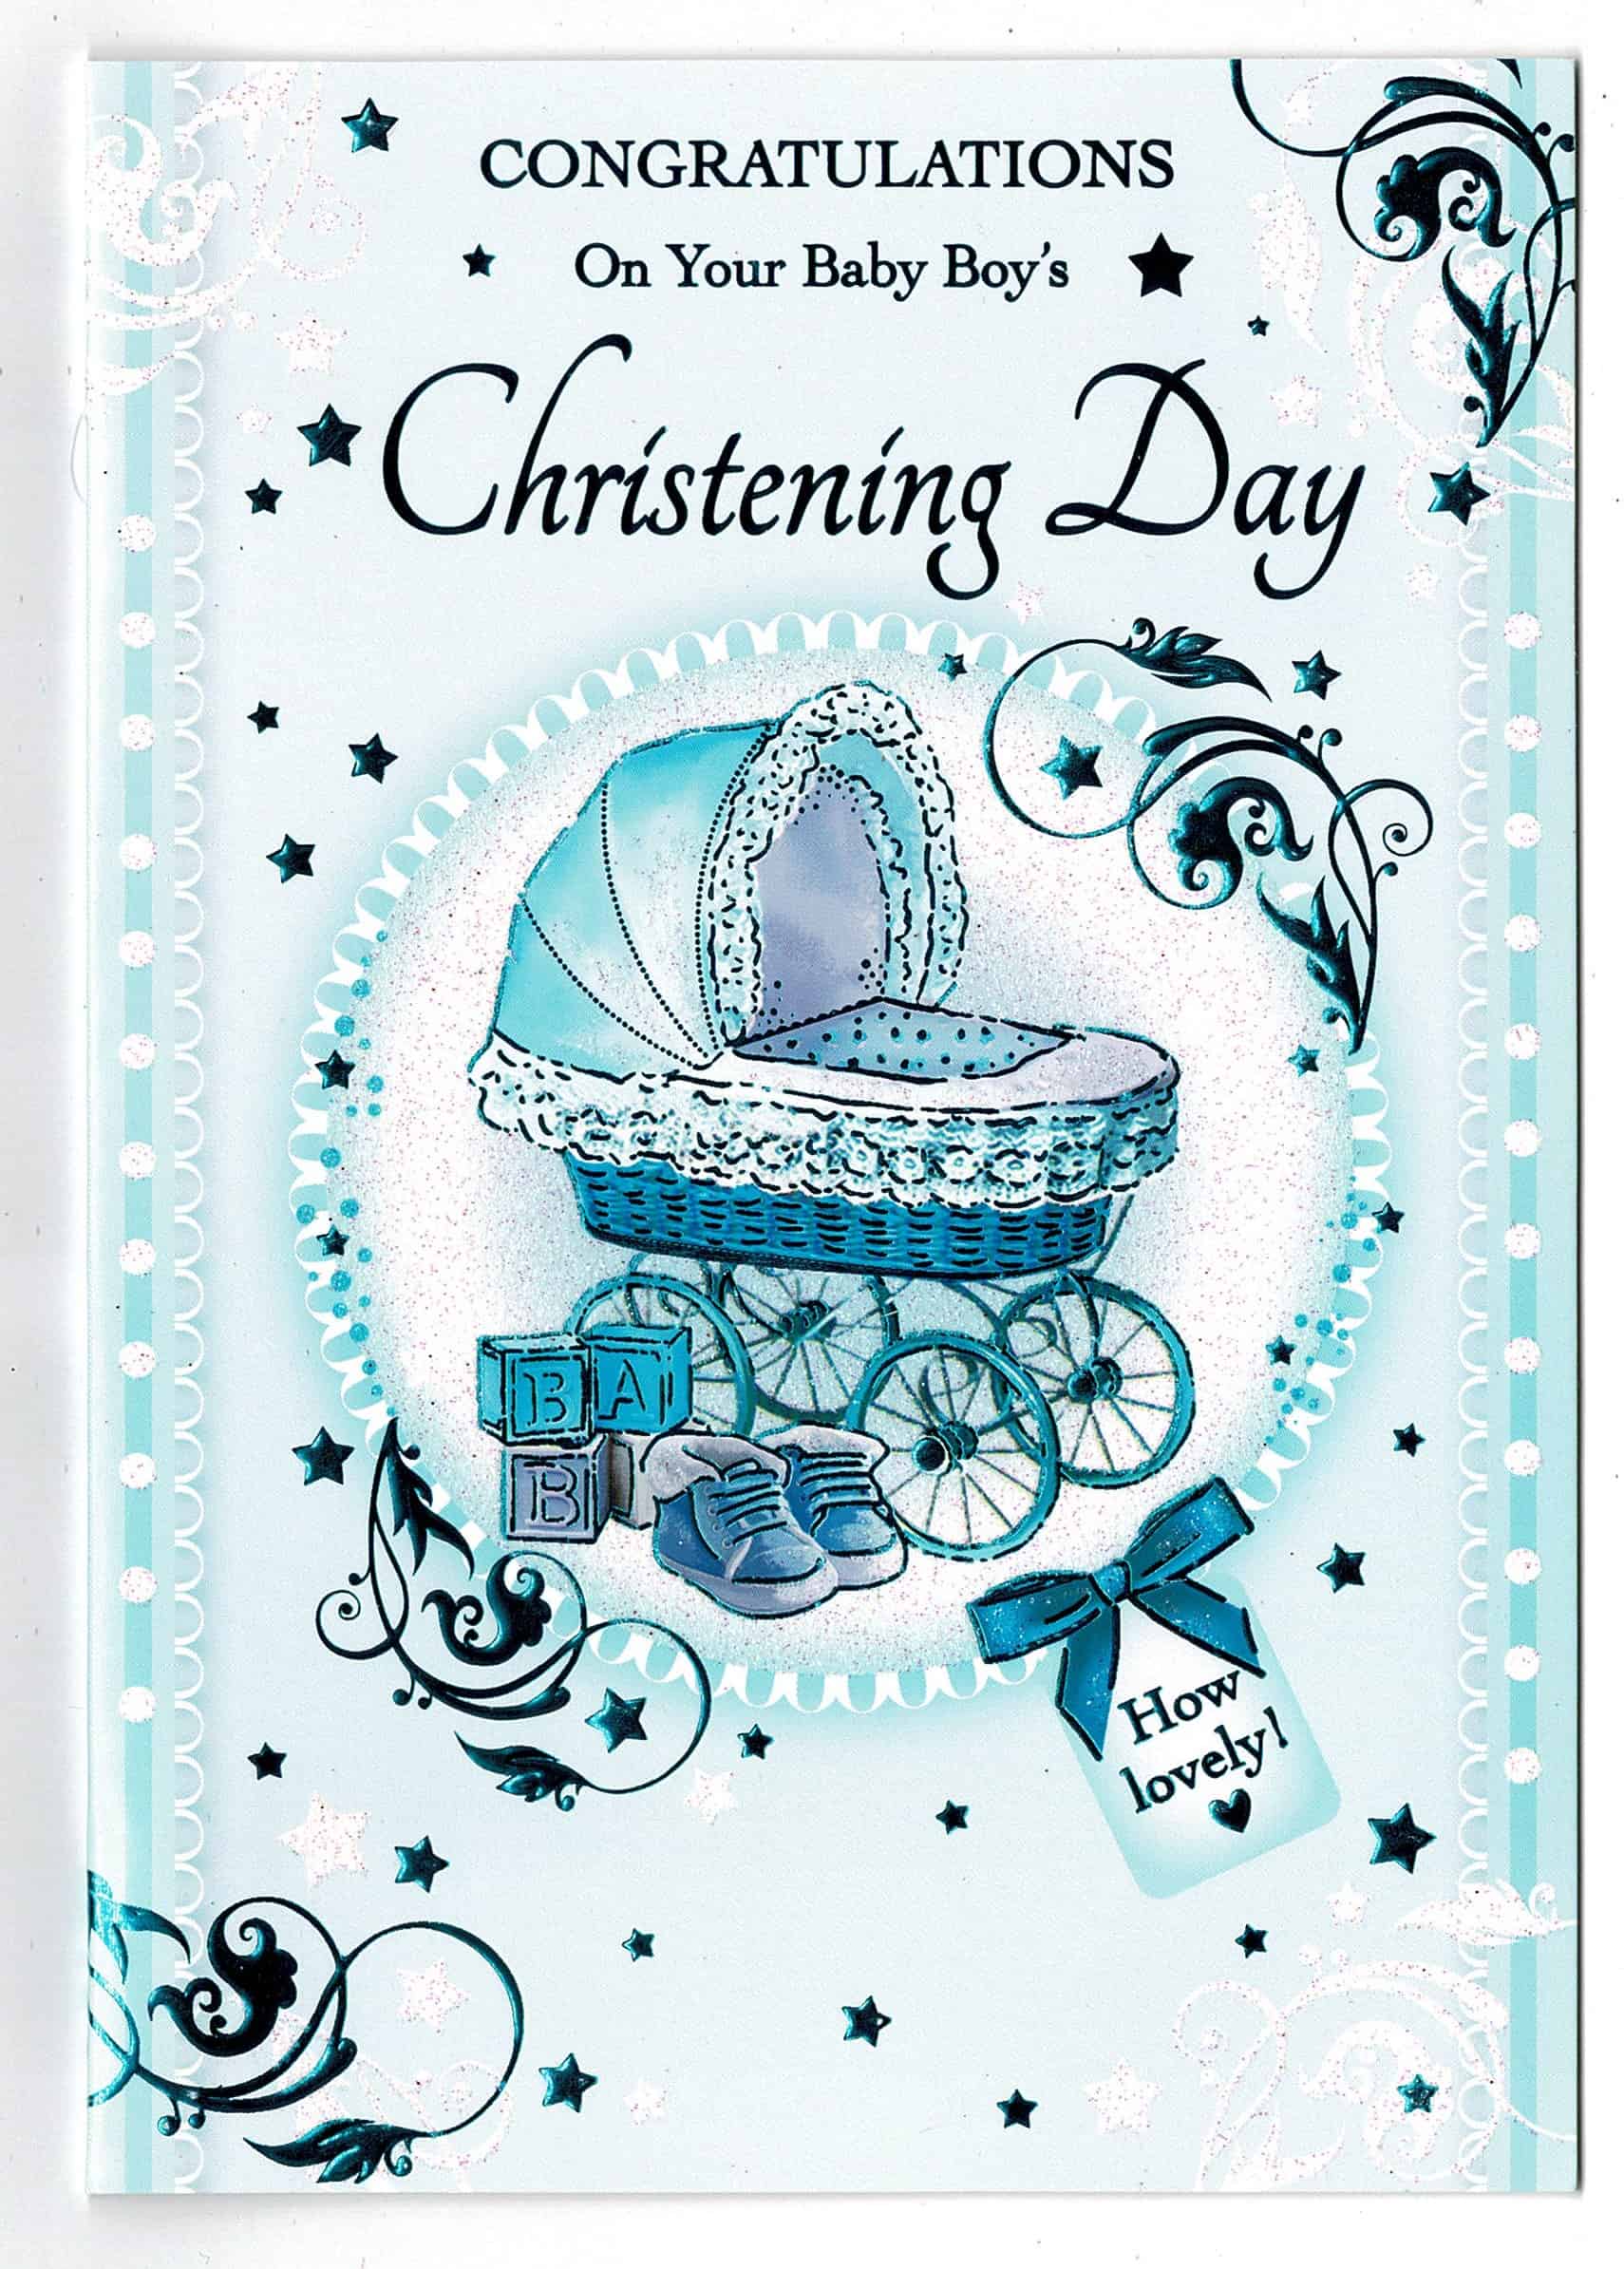 Christening Card For Baby Boy Congratulations On Your Baby Boys Christening Day With Love Gifts Cards